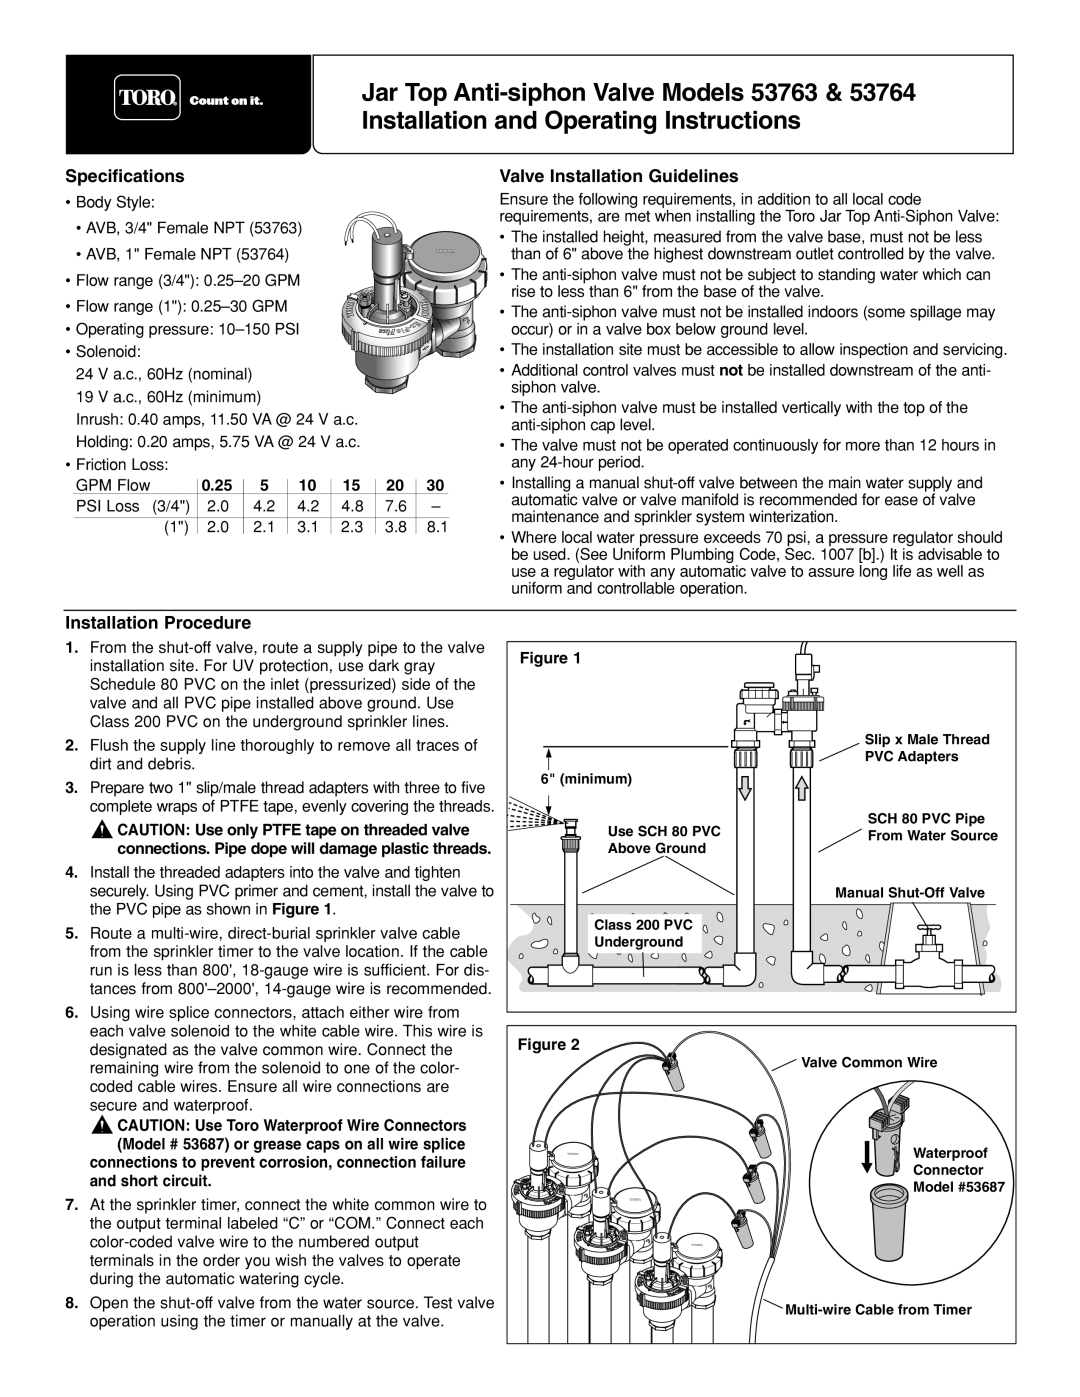 Toro 53764 specifications Specifications, Valve Installation Guidelines, Installation Procedure, 0.25, and short circuit 